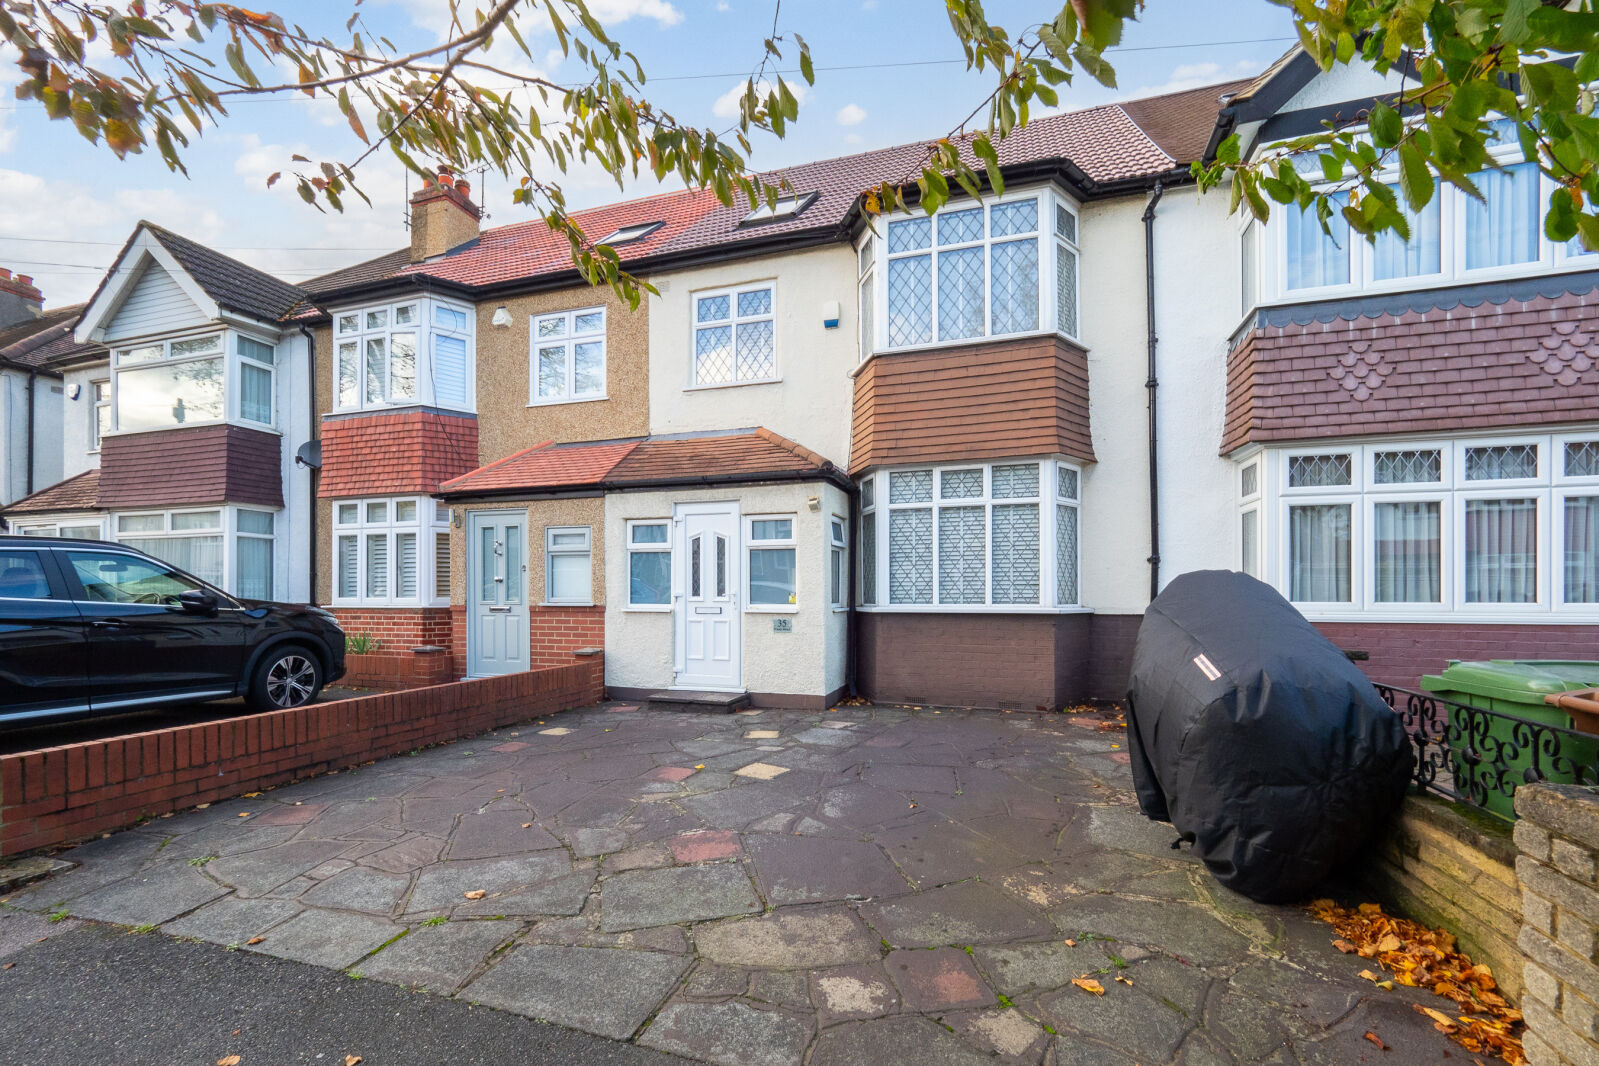 4 bedroom mid terraced house for sale Priory Road, Cheam, SM3, main image